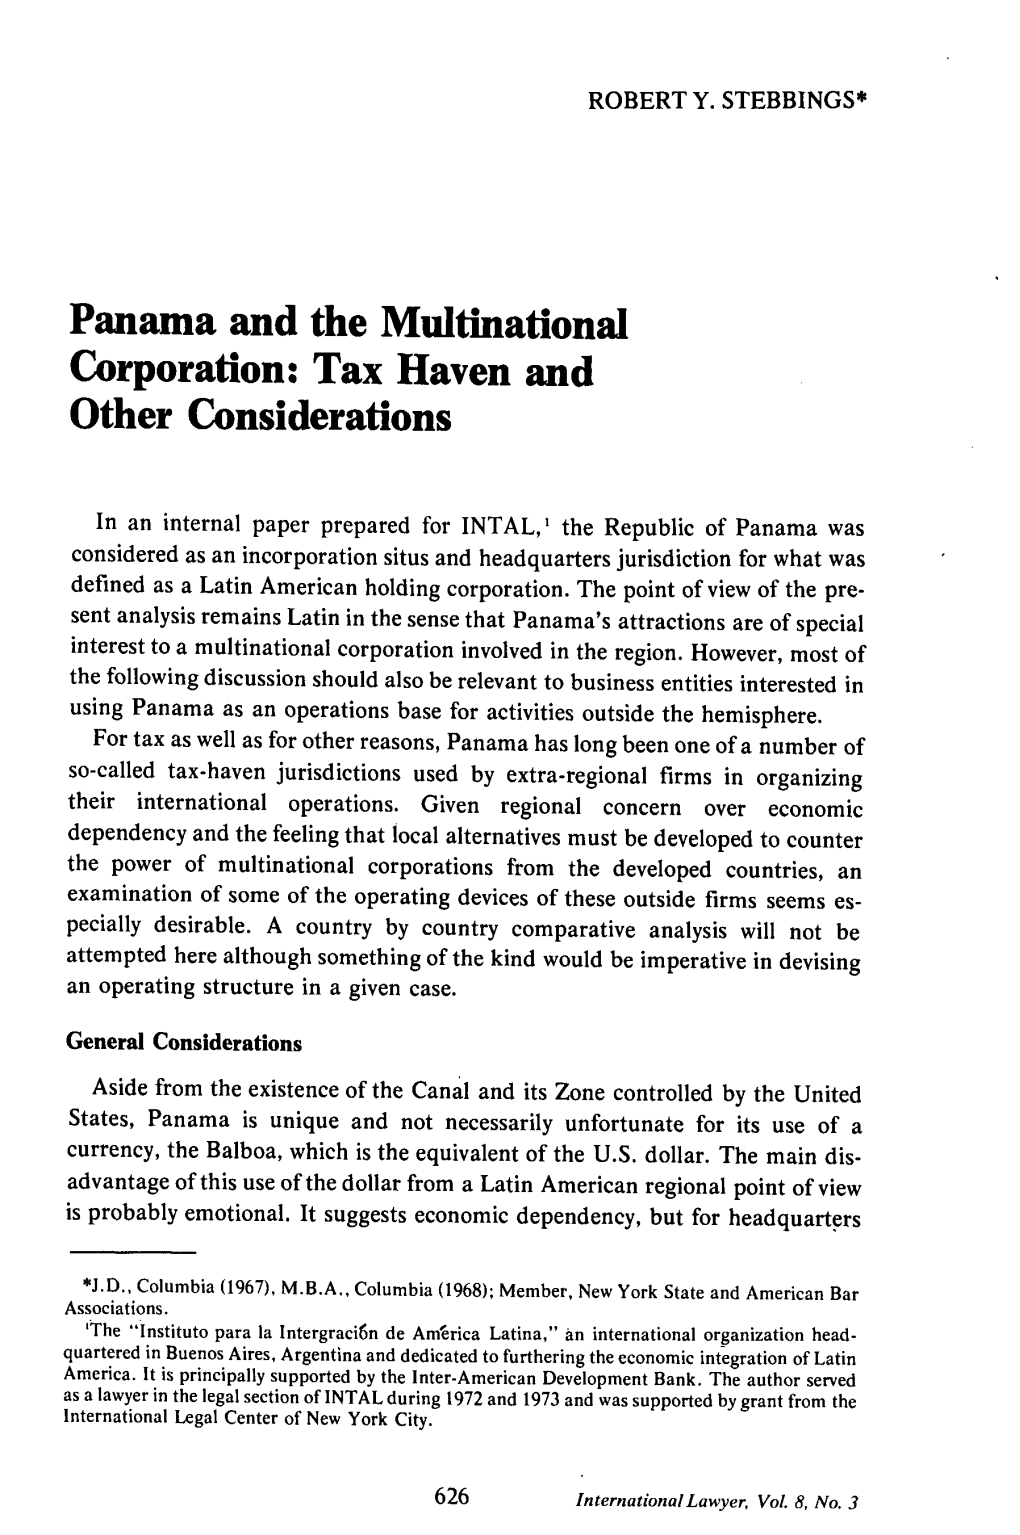 Panama and Multinaitonal Corporation: Tax Haven and Other